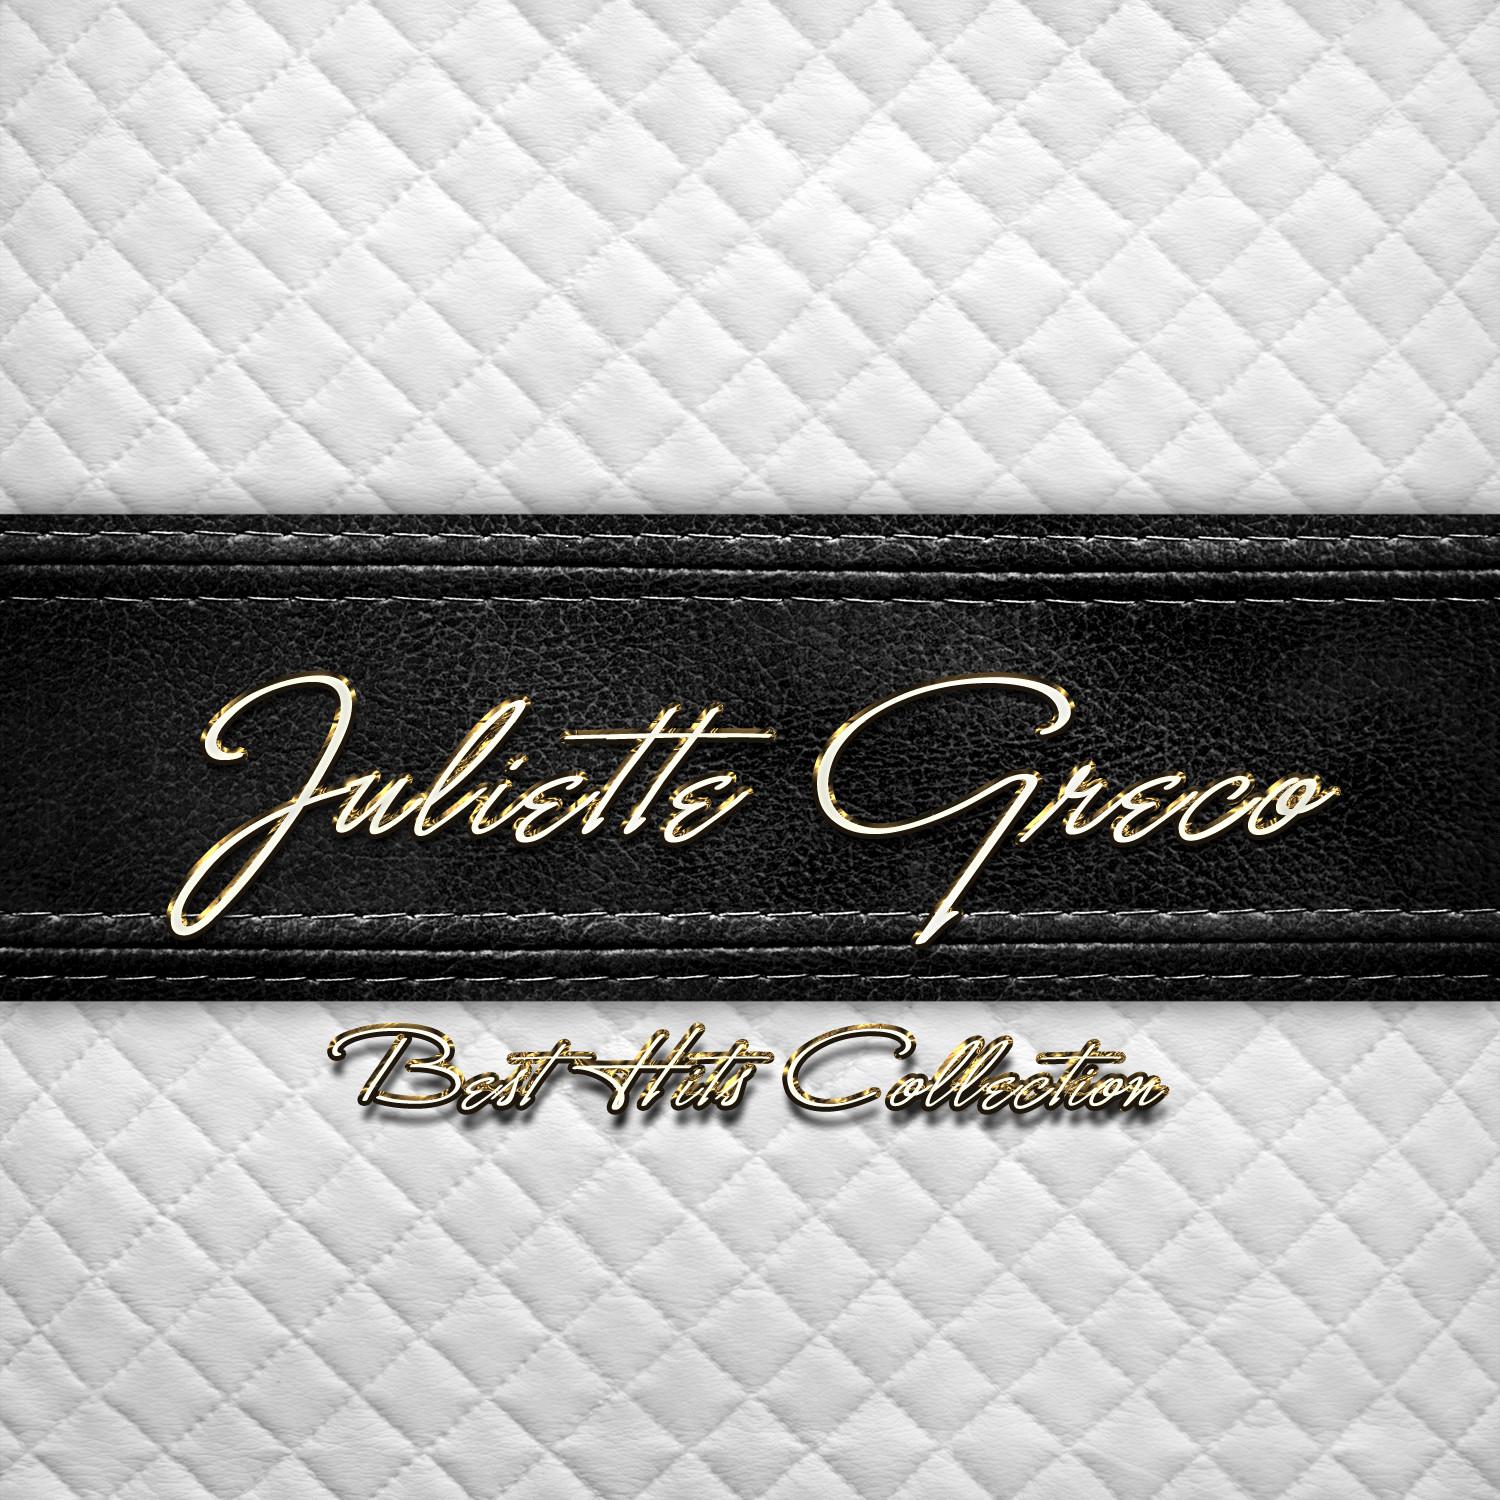 Best Hits Collection of Juliette Greco